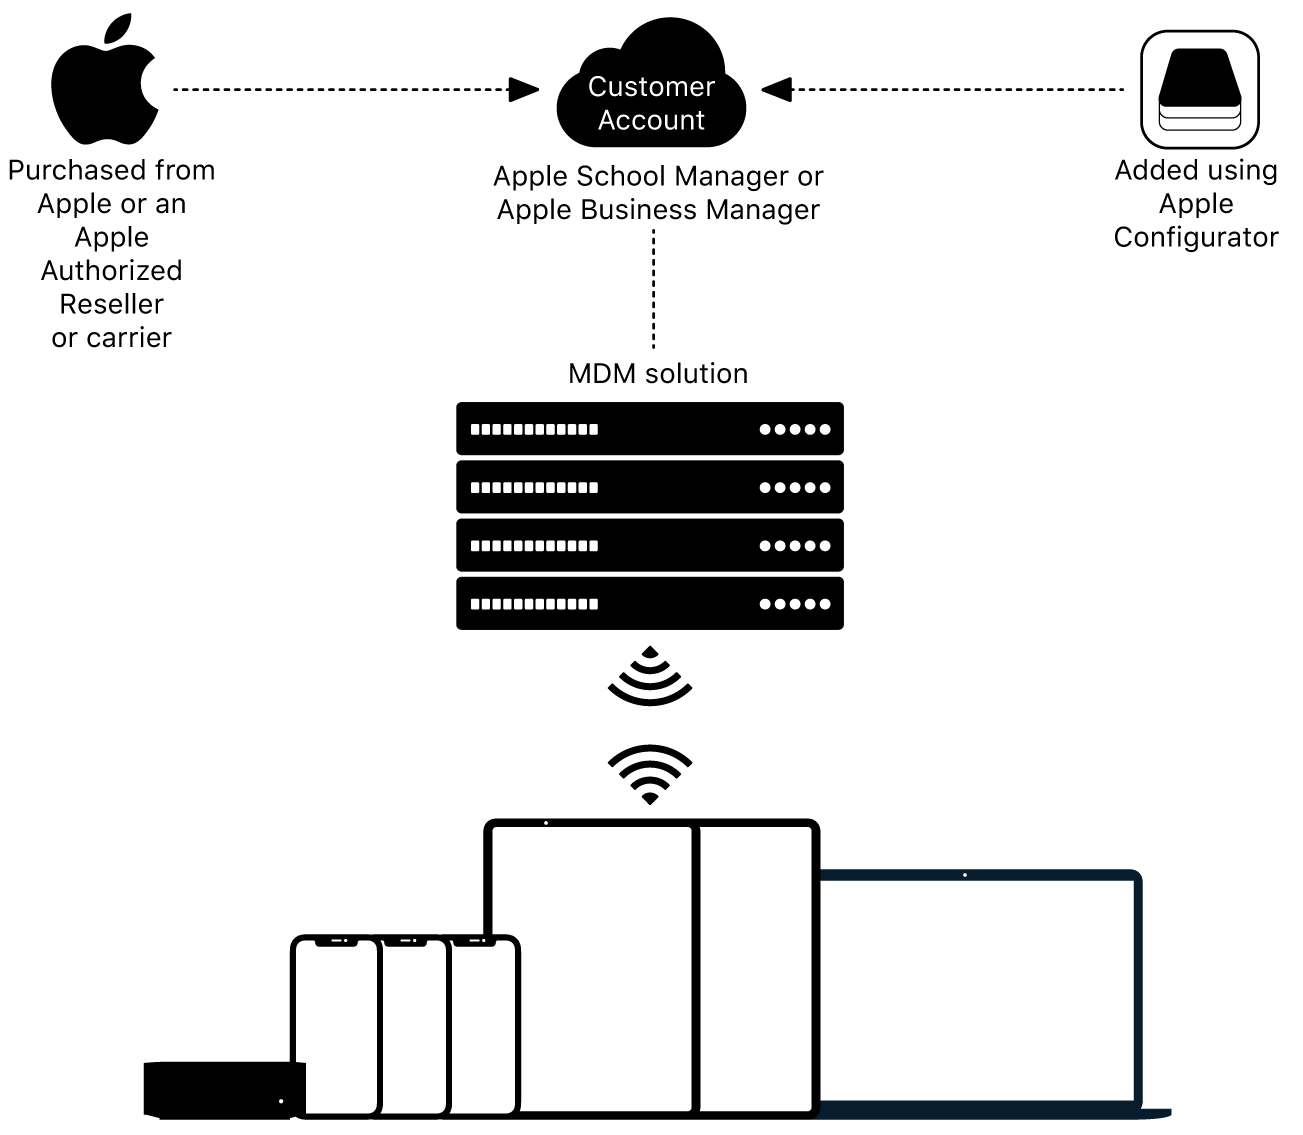 Deploy devices using Apple School Manager, Apple Business Manager, or